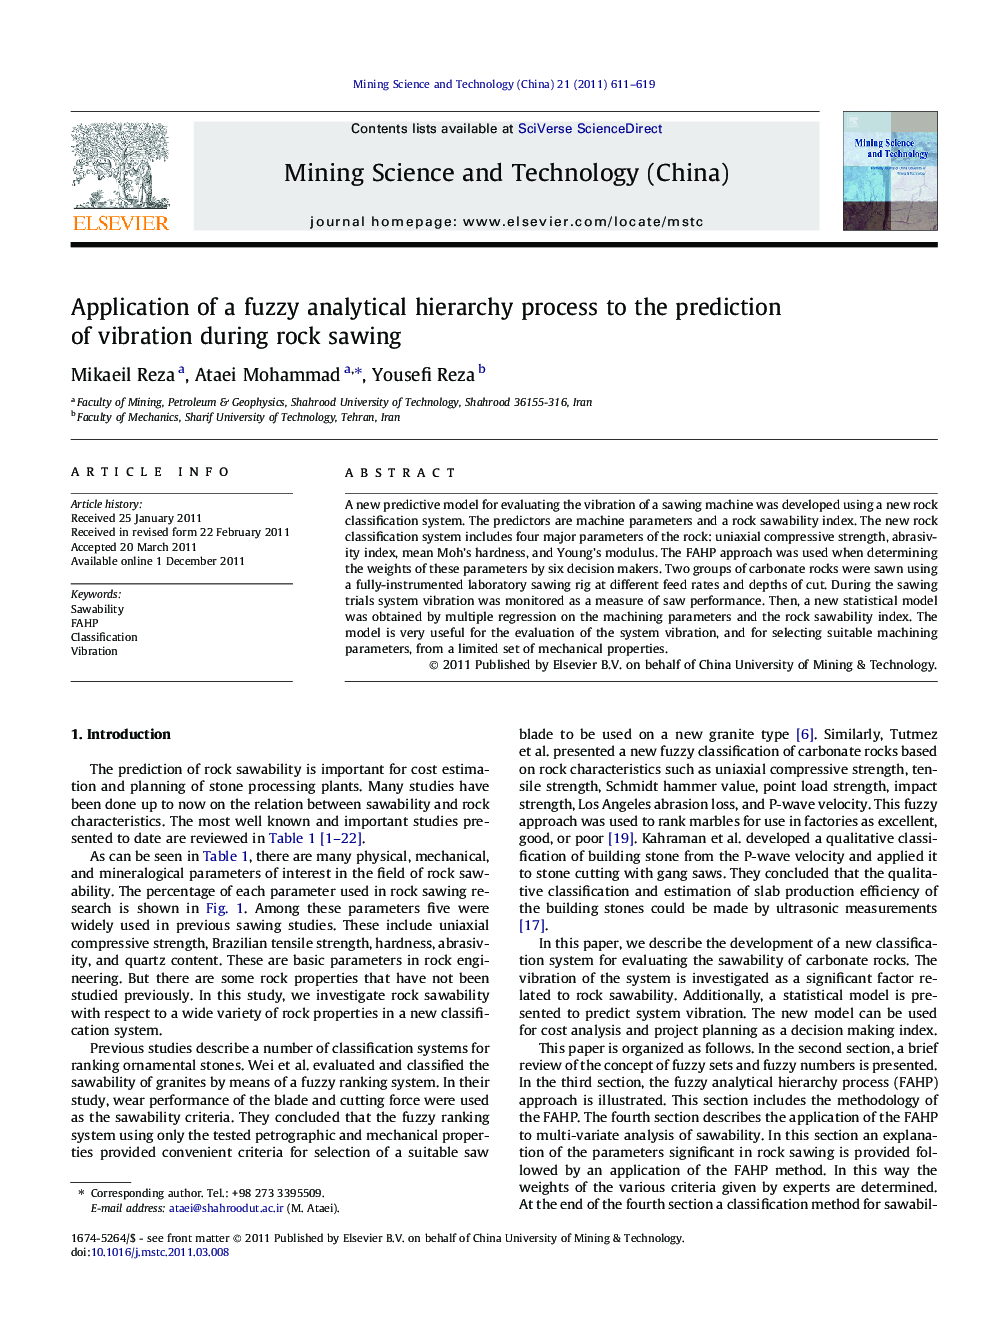 Application of a fuzzy analytical hierarchy process to the prediction of vibration during rock sawing